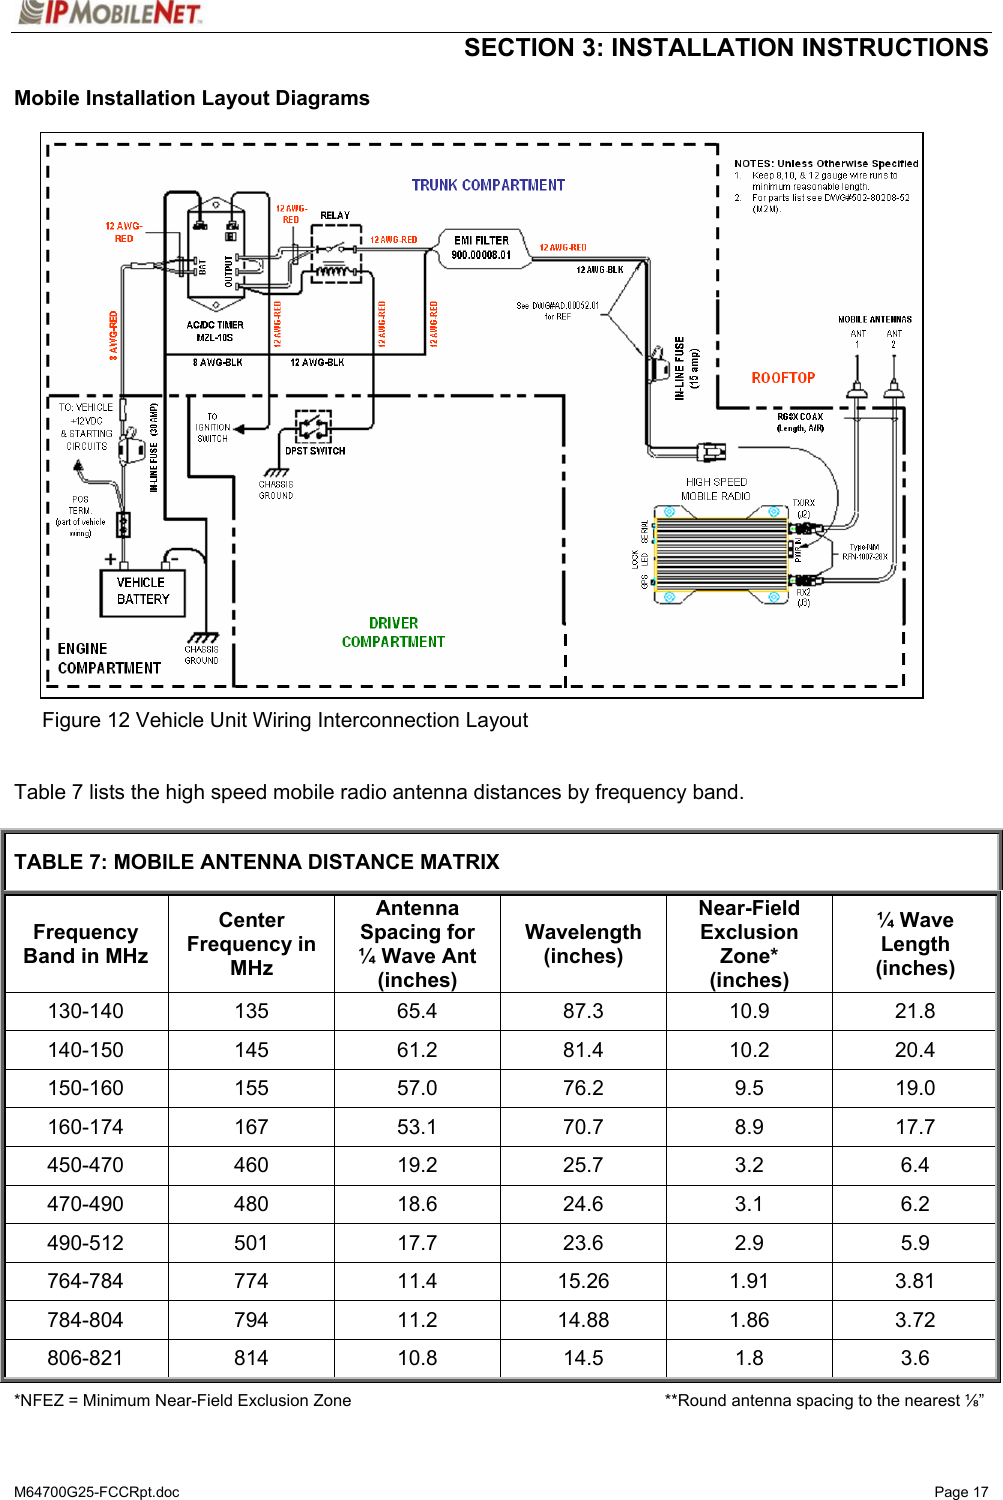  SECTION 3: INSTALLATION INSTRUCTIONS  M64700G25-FCCRpt.doc   Page 17 Mobile Installation Layout Diagrams                              Figure 12 Vehicle Unit Wiring Interconnection Layout   Table 7 lists the high speed mobile radio antenna distances by frequency band.  TABLE 7: MOBILE ANTENNA DISTANCE MATRIX Frequency Band in MHz Center Frequency in MHz Antenna Spacing for ¼ Wave Ant (inches) Wavelength (inches) Near-Field Exclusion Zone* (inches) ¼ Wave Length (inches) 130-140 135  65.4  87.3  10.9  21.8 140-150 145  61.2  81.4  10.2  20.4 150-160 155 57.0 76.2 9.5 19.0 160-174 167 53.1 70.7 8.9 17.7 450-470 460  19.2  25.7  3.2  6.4 470-490 480  18.6  24.6  3.1  6.2 490-512 501  17.7  23.6  2.9  5.9 764-784 774  11.4  15.26  1.91  3.81 784-804 794  11.2  14.88  1.86  3.72 806-821 814  10.8  14.5  1.8  3.6 *NFEZ = Minimum Near-Field Exclusion Zone                    **Round antenna spacing to the nearest ⅛” 